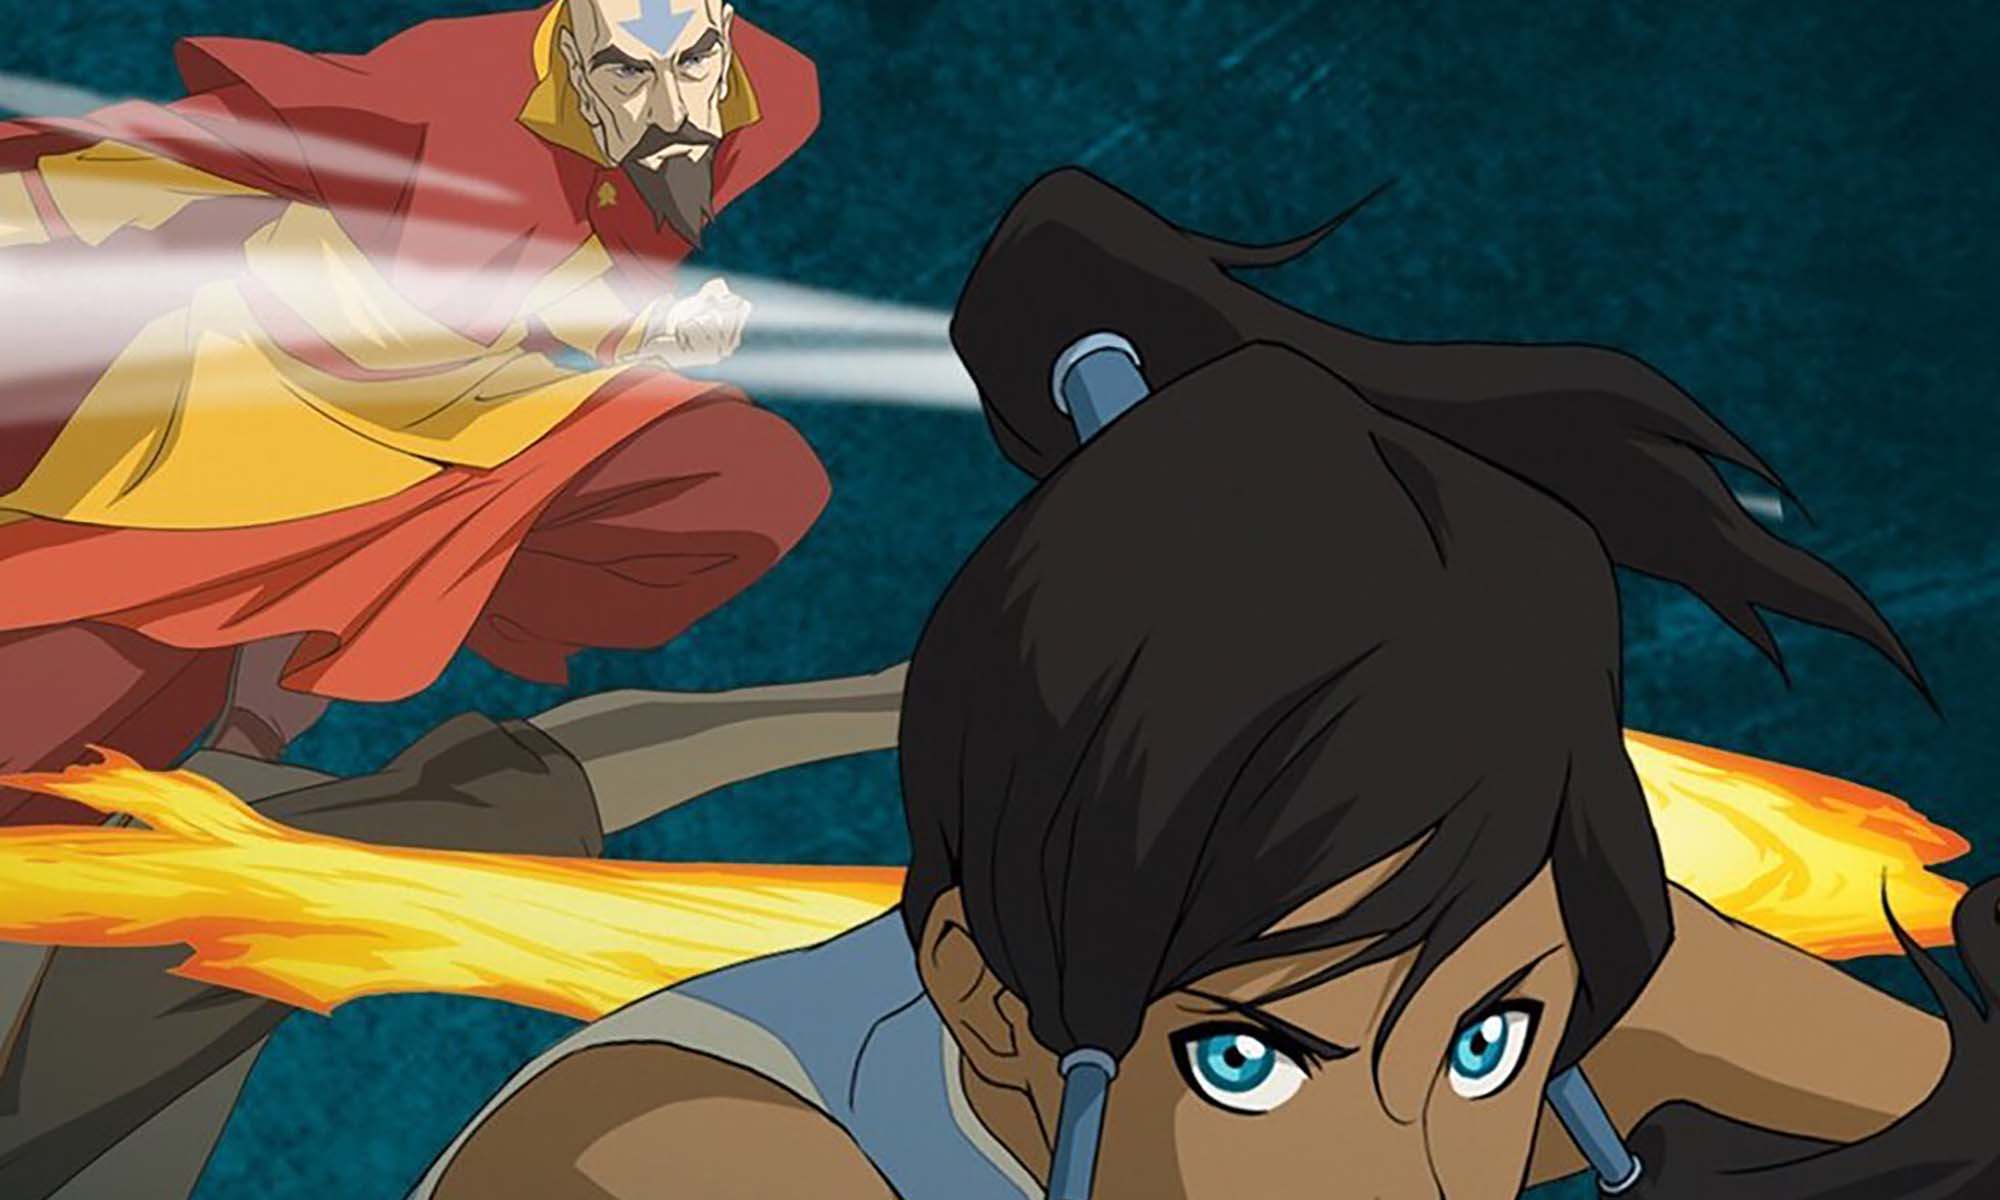 9 Shows Like Avatar The Last Airbender for Epic Animated Adventure